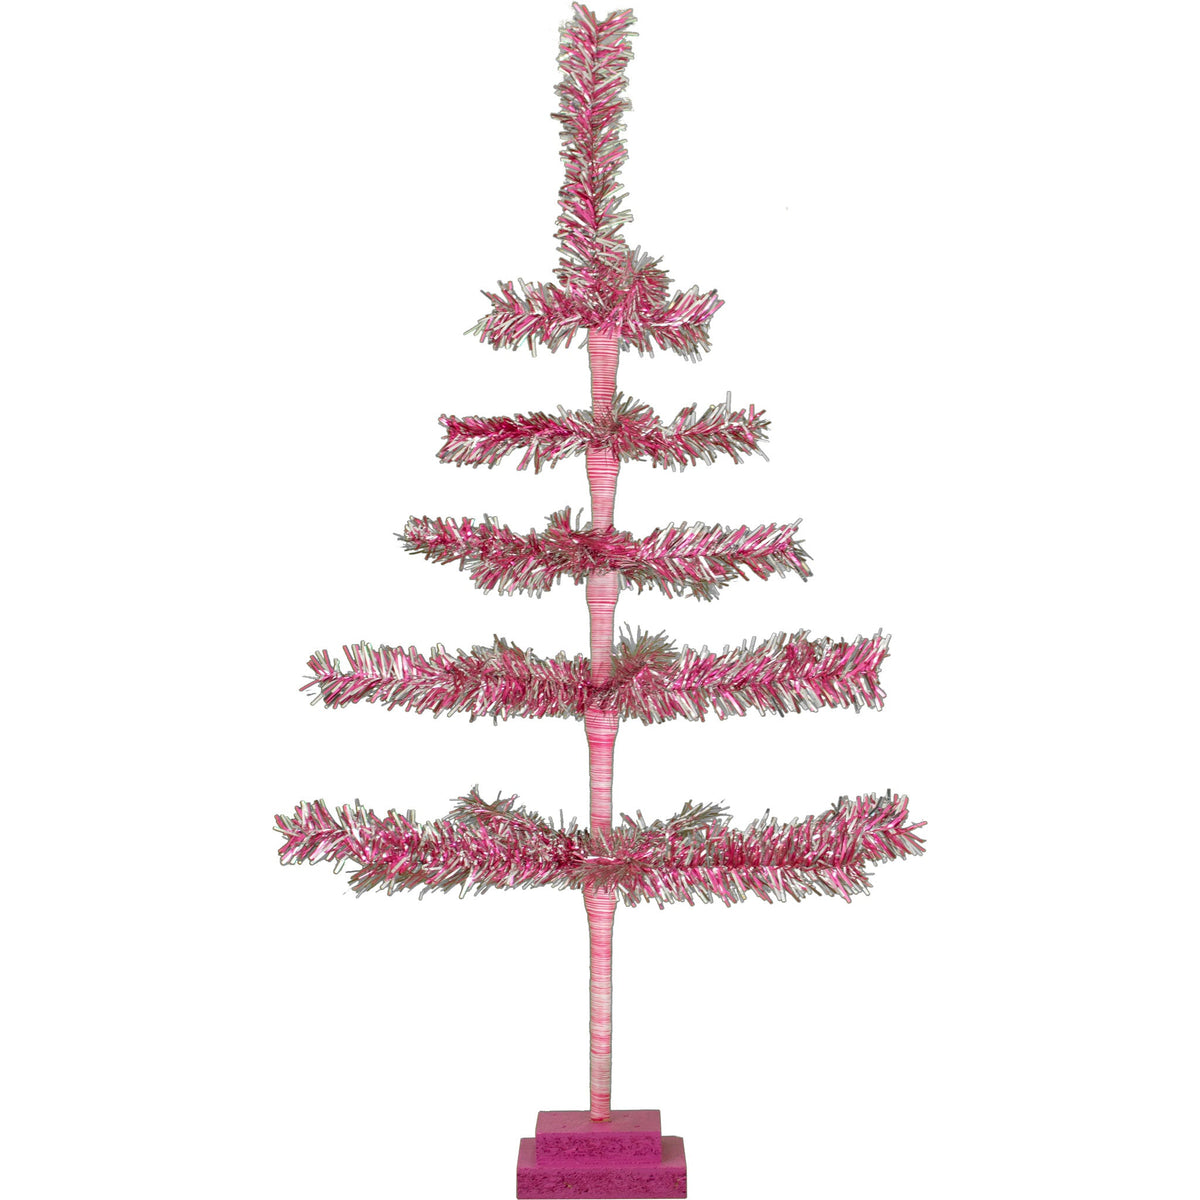 Introducing Lee Display's Limited Edition 28in Tall Vintage Pink and Silver Tinsel Christmas Tree – a rare find from our archives, crafted over a decade ago and available in limited quantity.